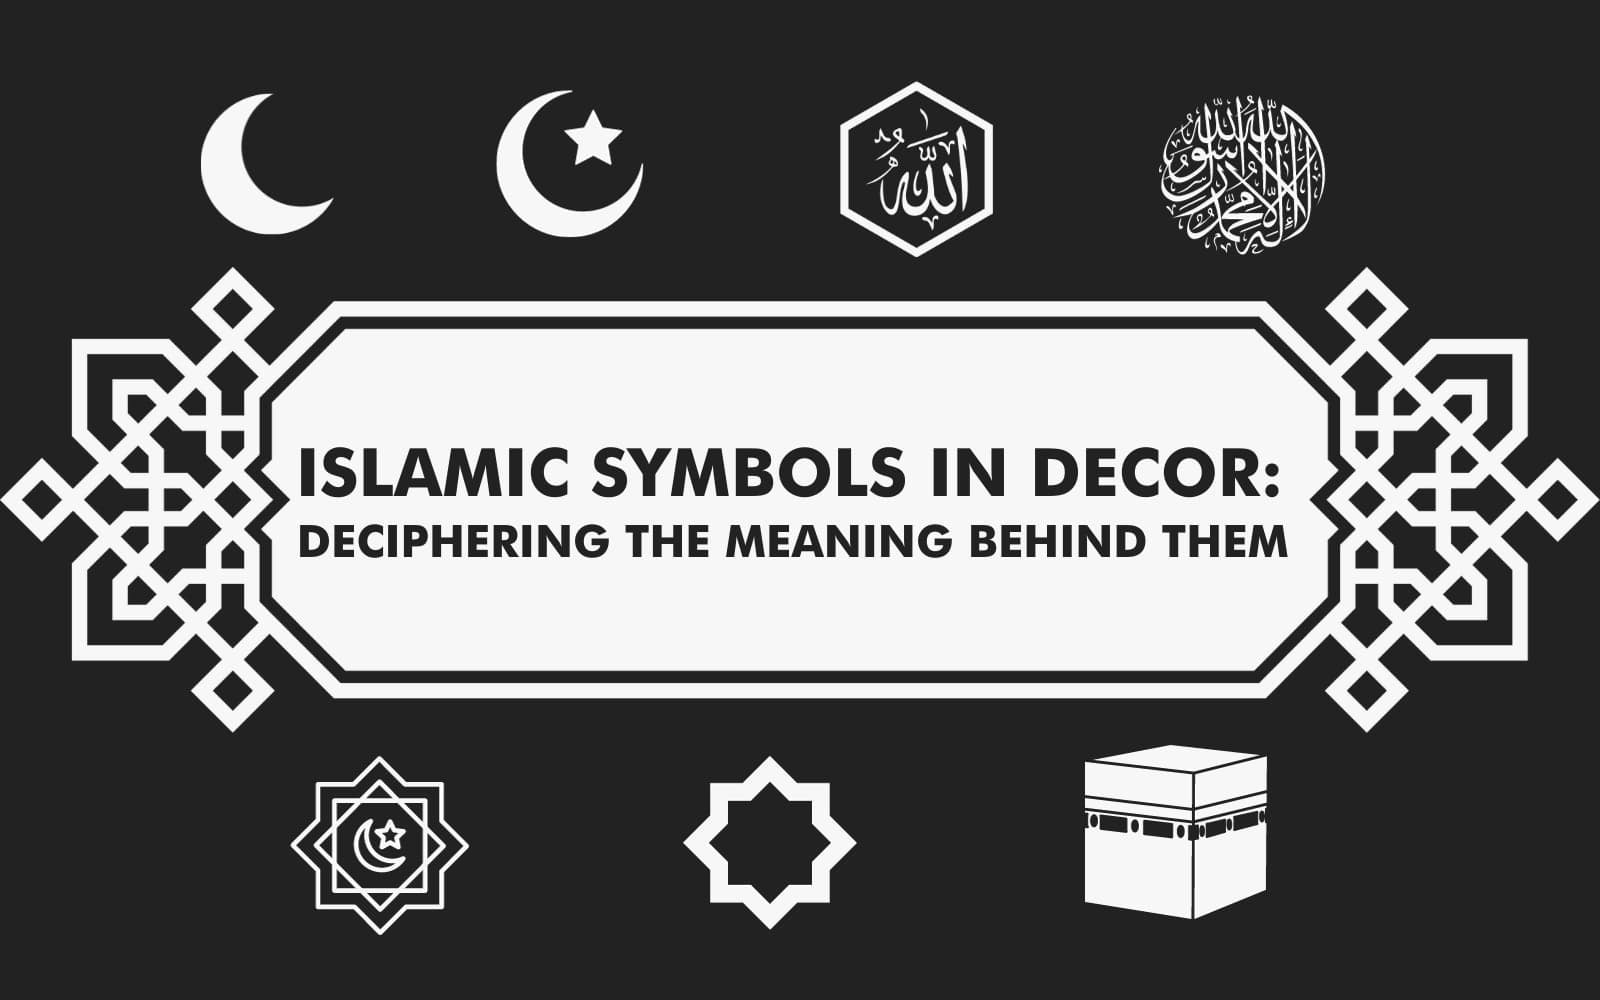 Islamic Symbols in Decor: Deciphering the Meaning Behind Them